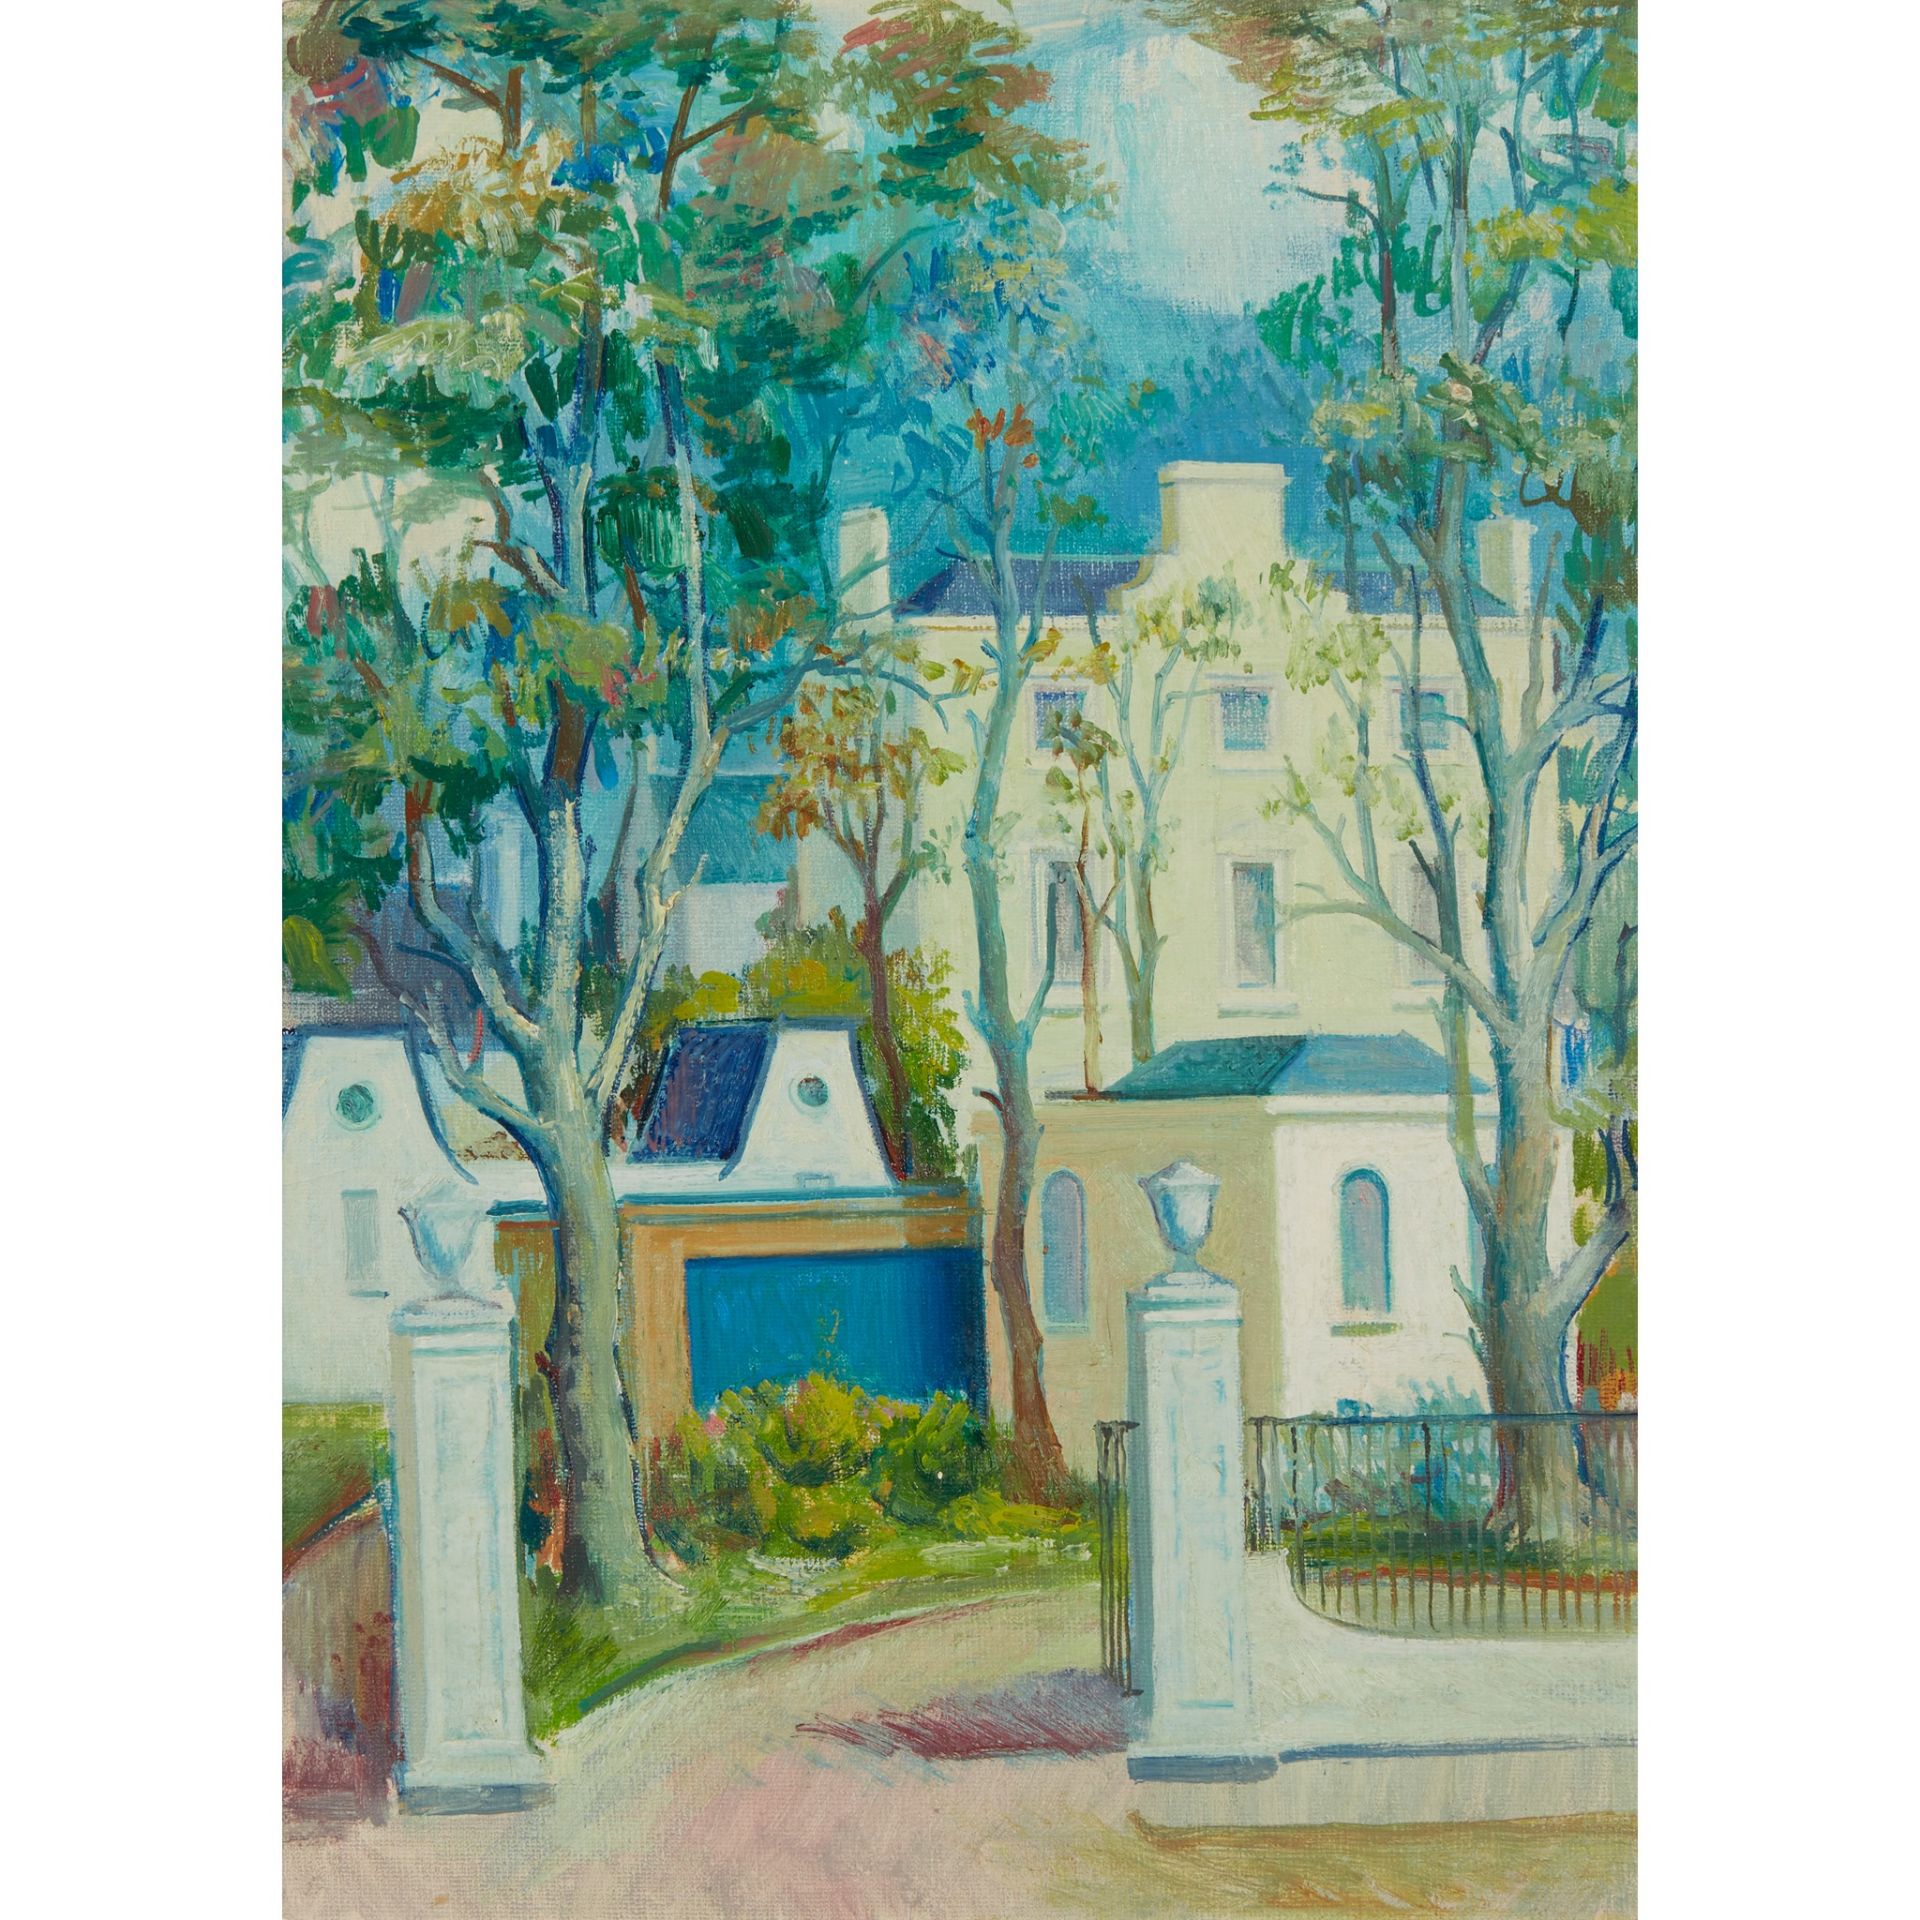 § WILLIAM CROSBIE R.S.A. (SCOTTISH 1915-1999) WHITE GATE WITH HOUSE, c.1970